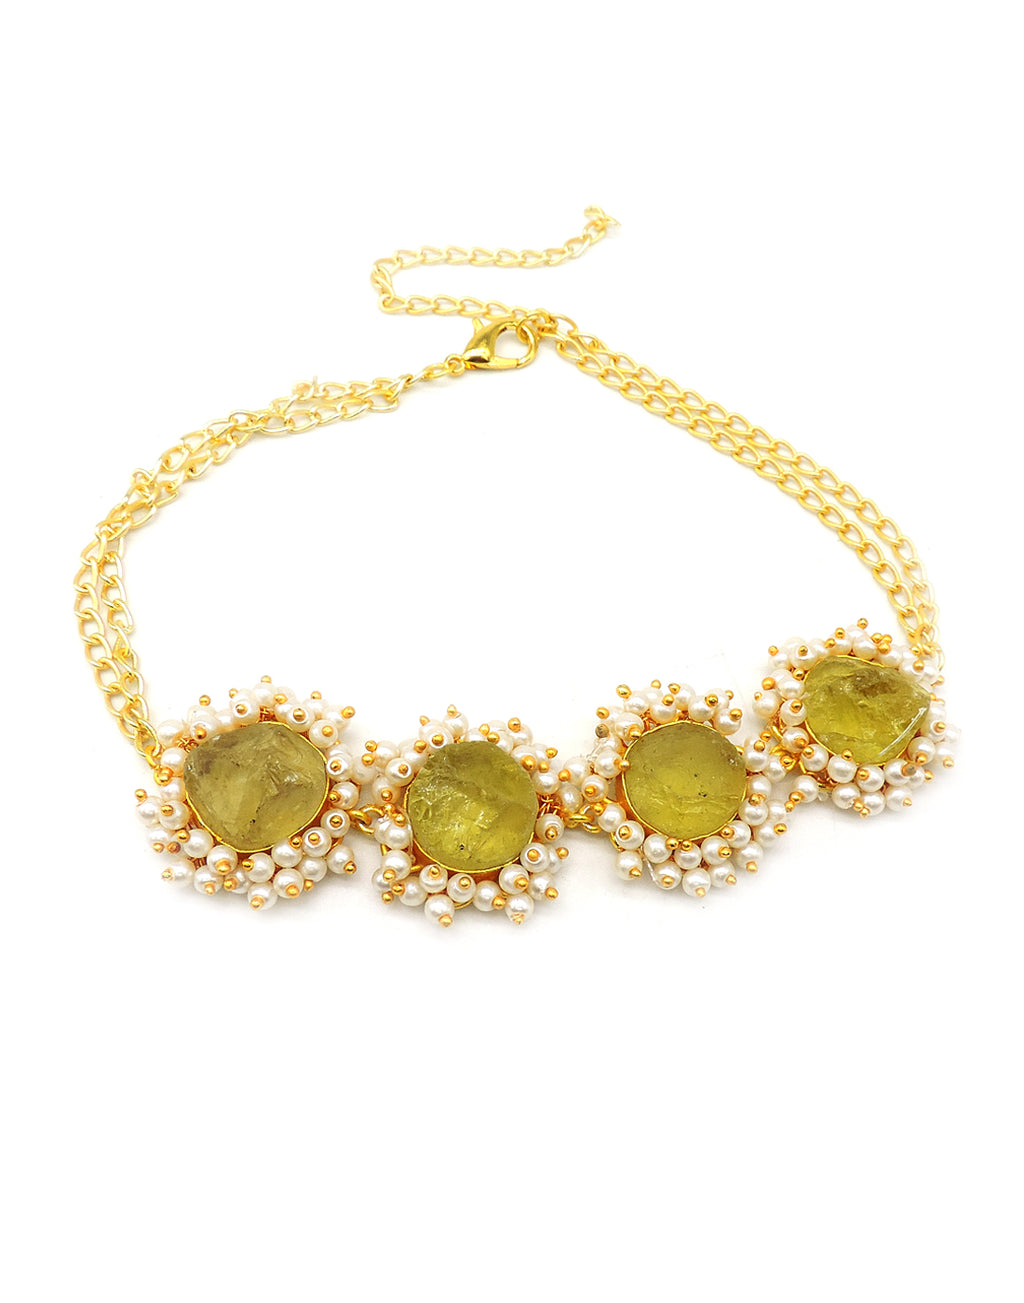 Citrine Bloom Necklace - Statement Necklaces - Gold-Plated & Hypoallergenic Jewellery - Made in India - Dubai Jewellery - Dori